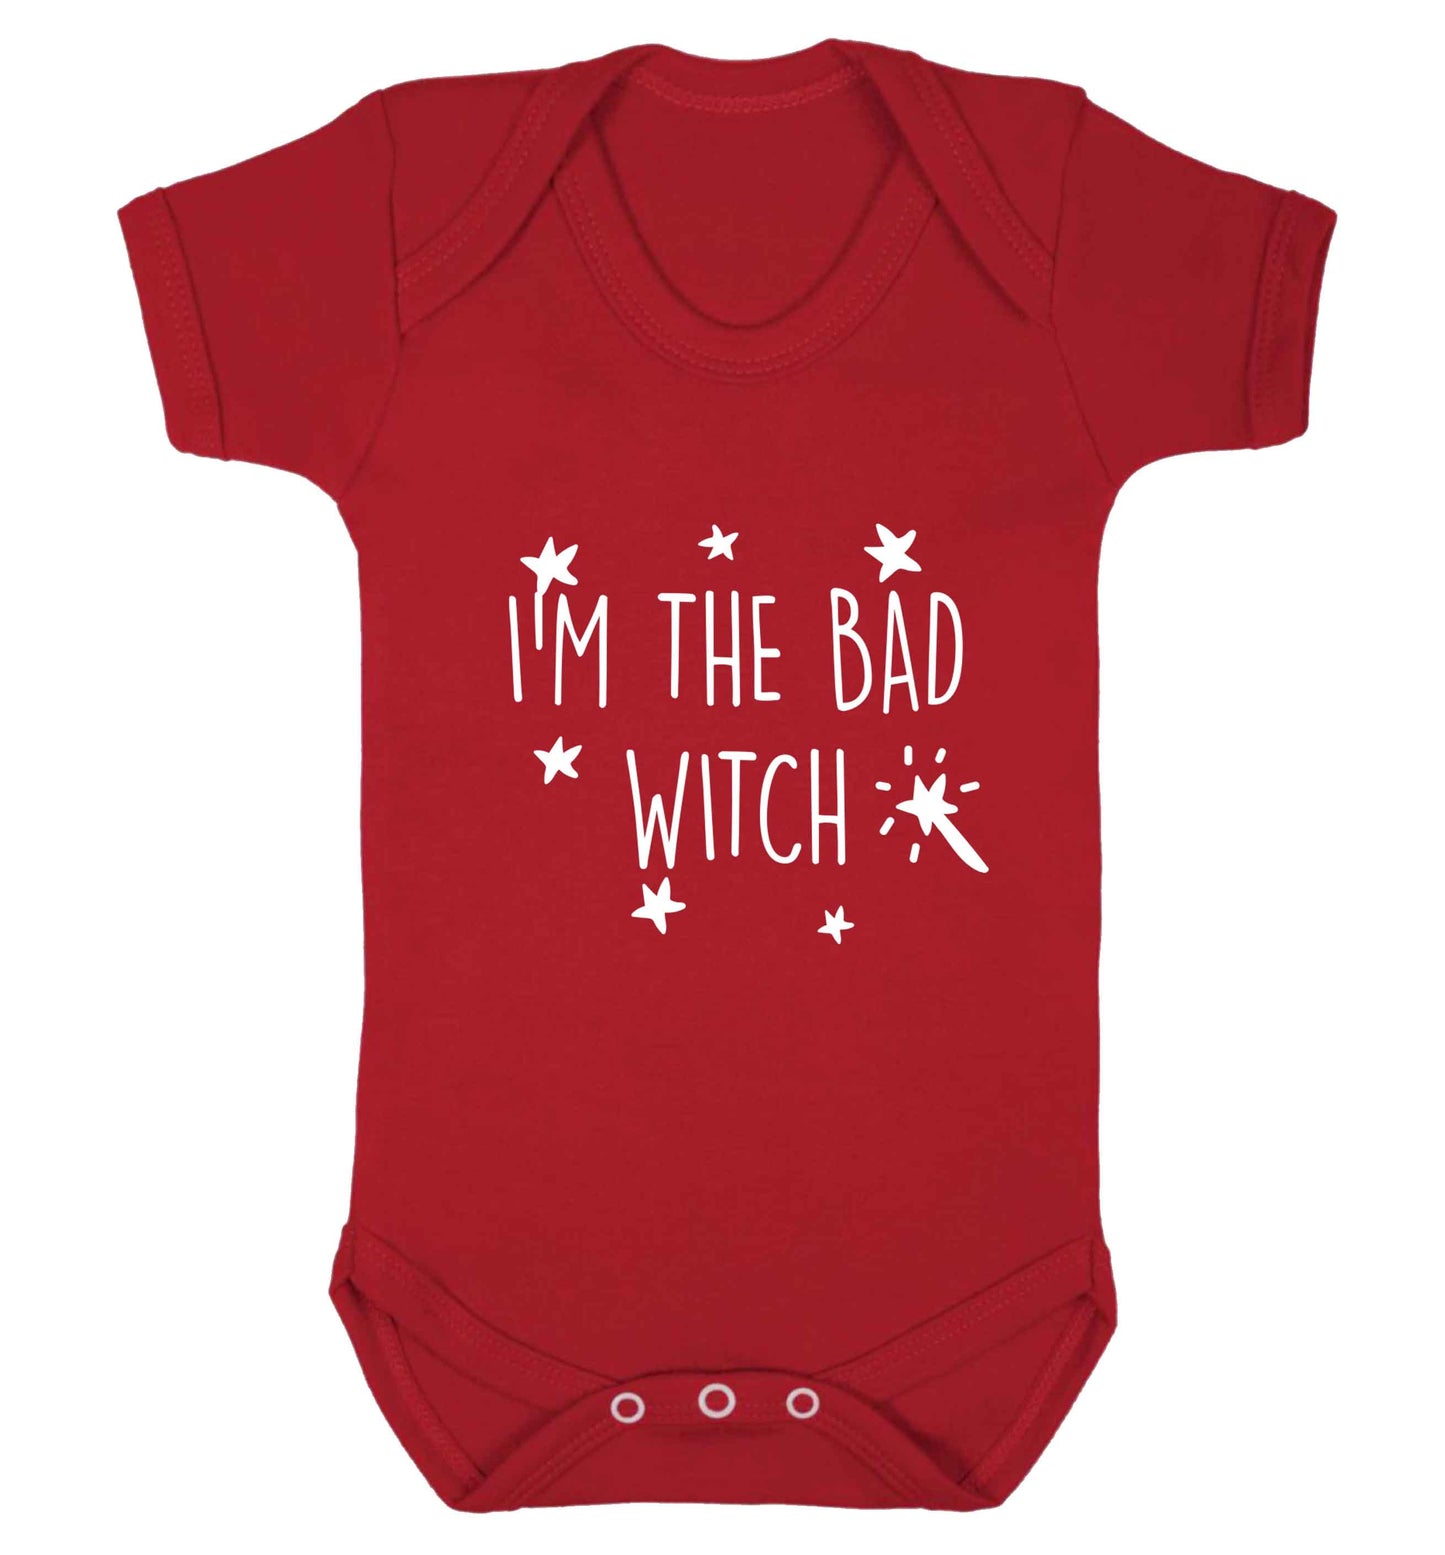 Bad witch baby vest red 18-24 months